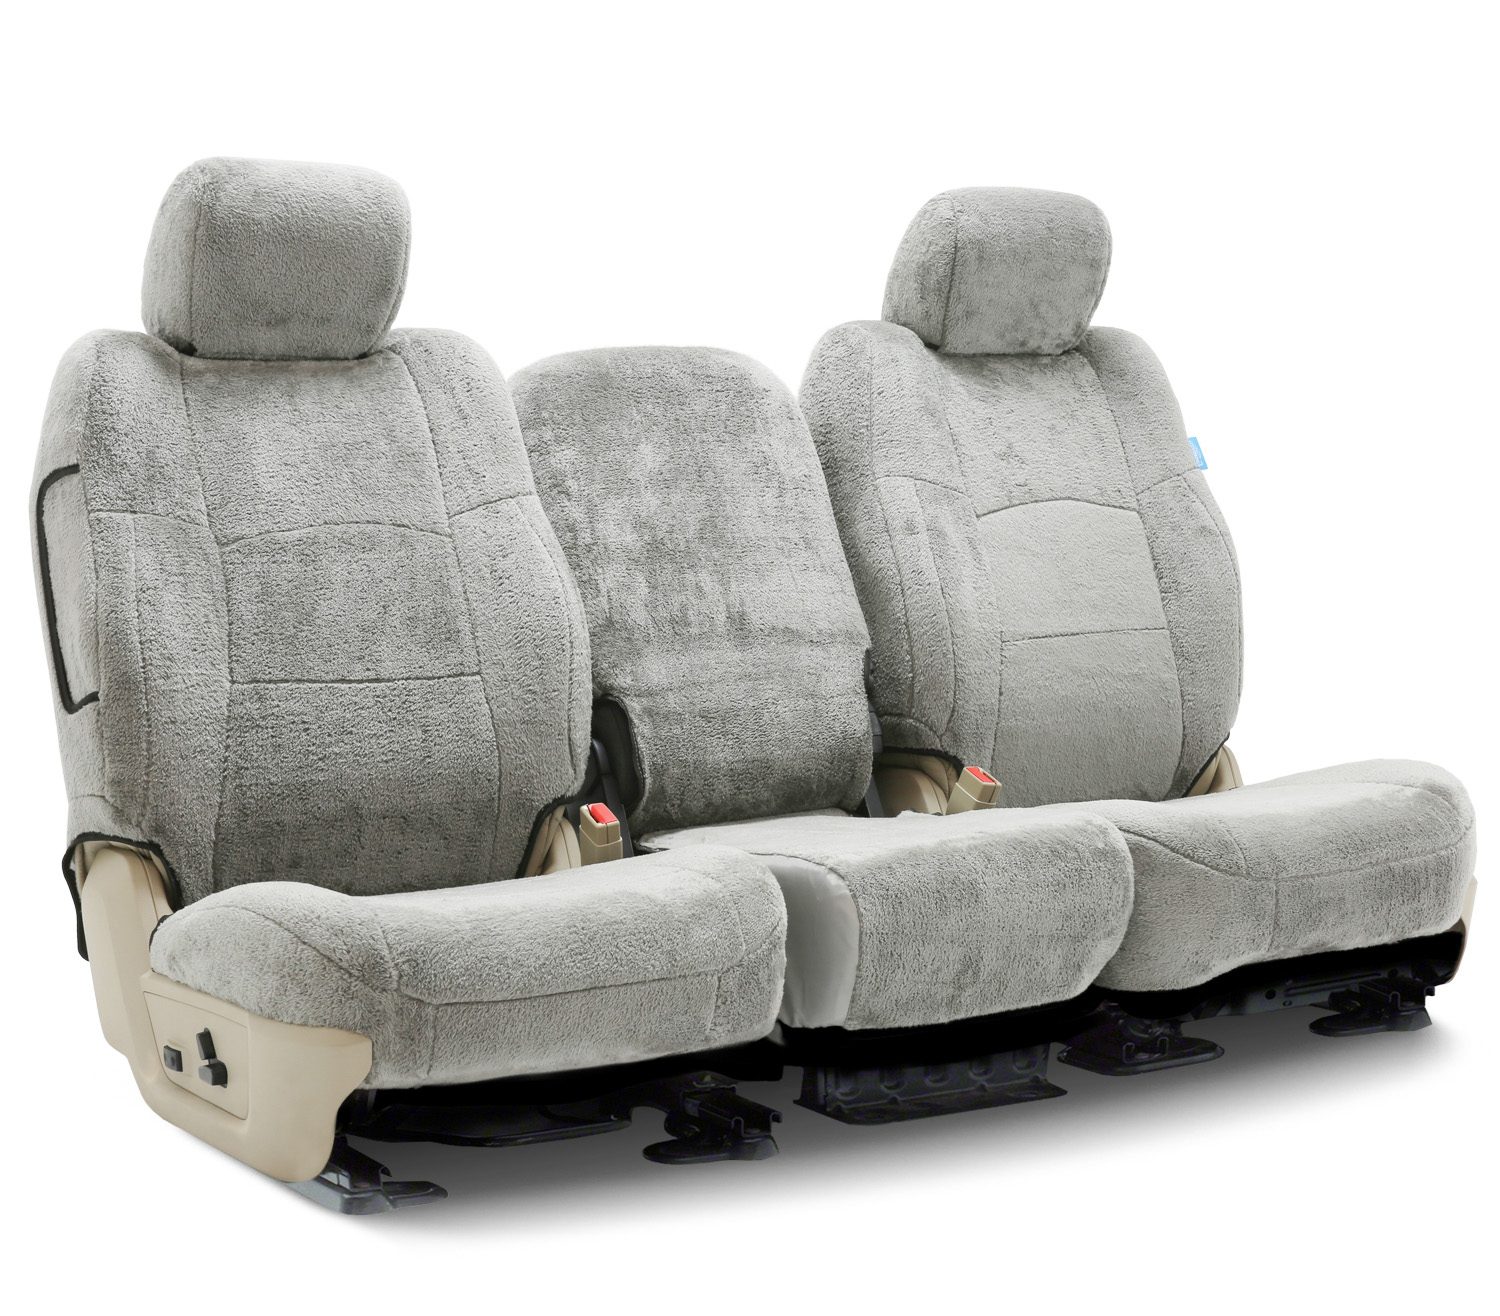 Snuggleplush Seat Covers for    